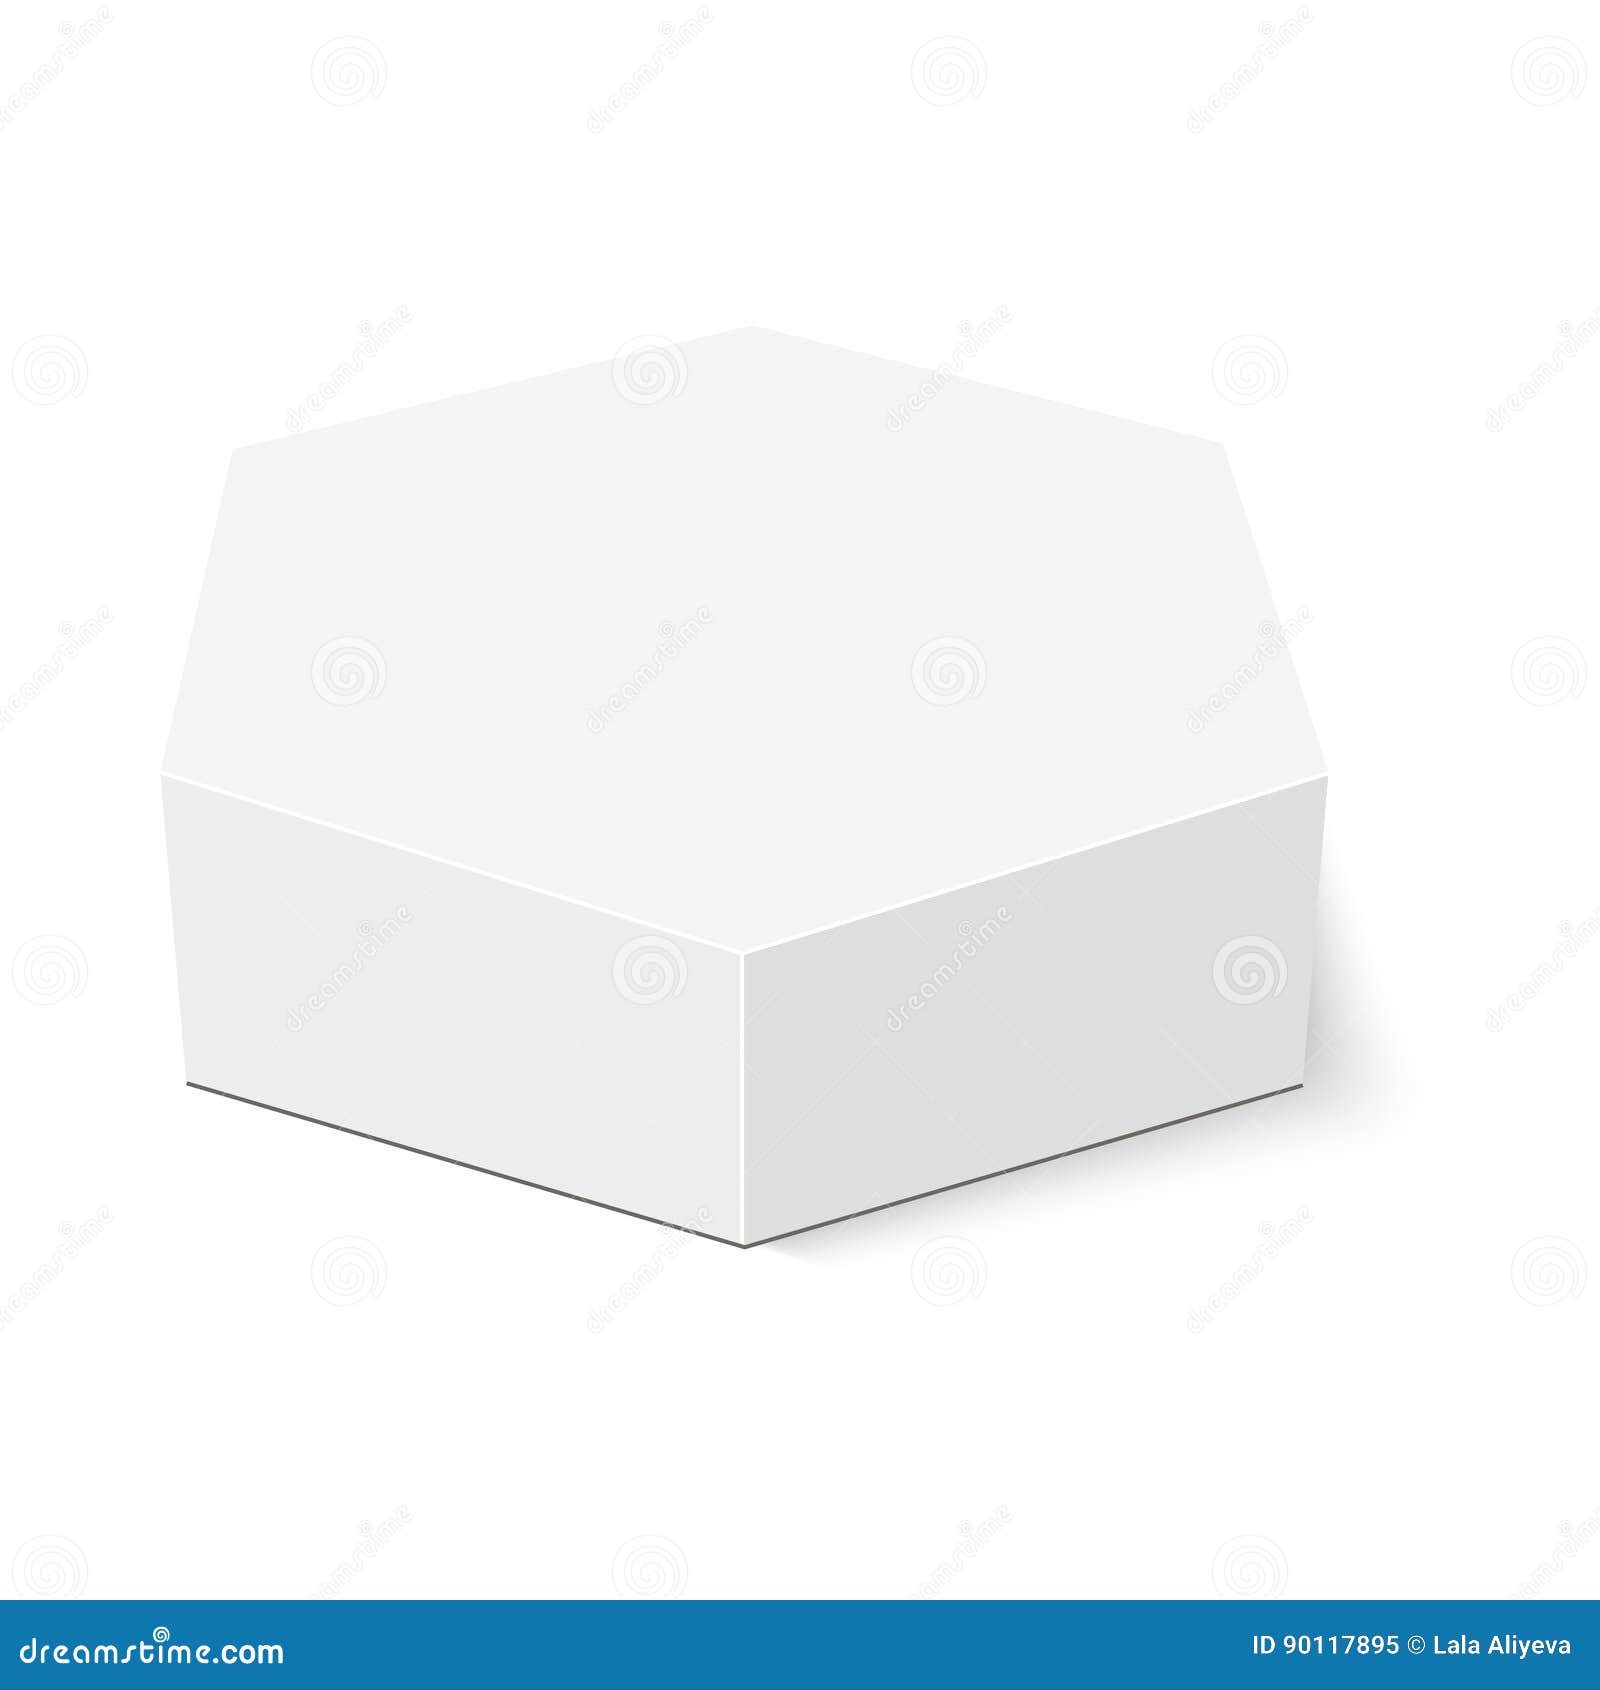 Download White Cardboard Hexagon Box Packaging .Vector Mock Up ...